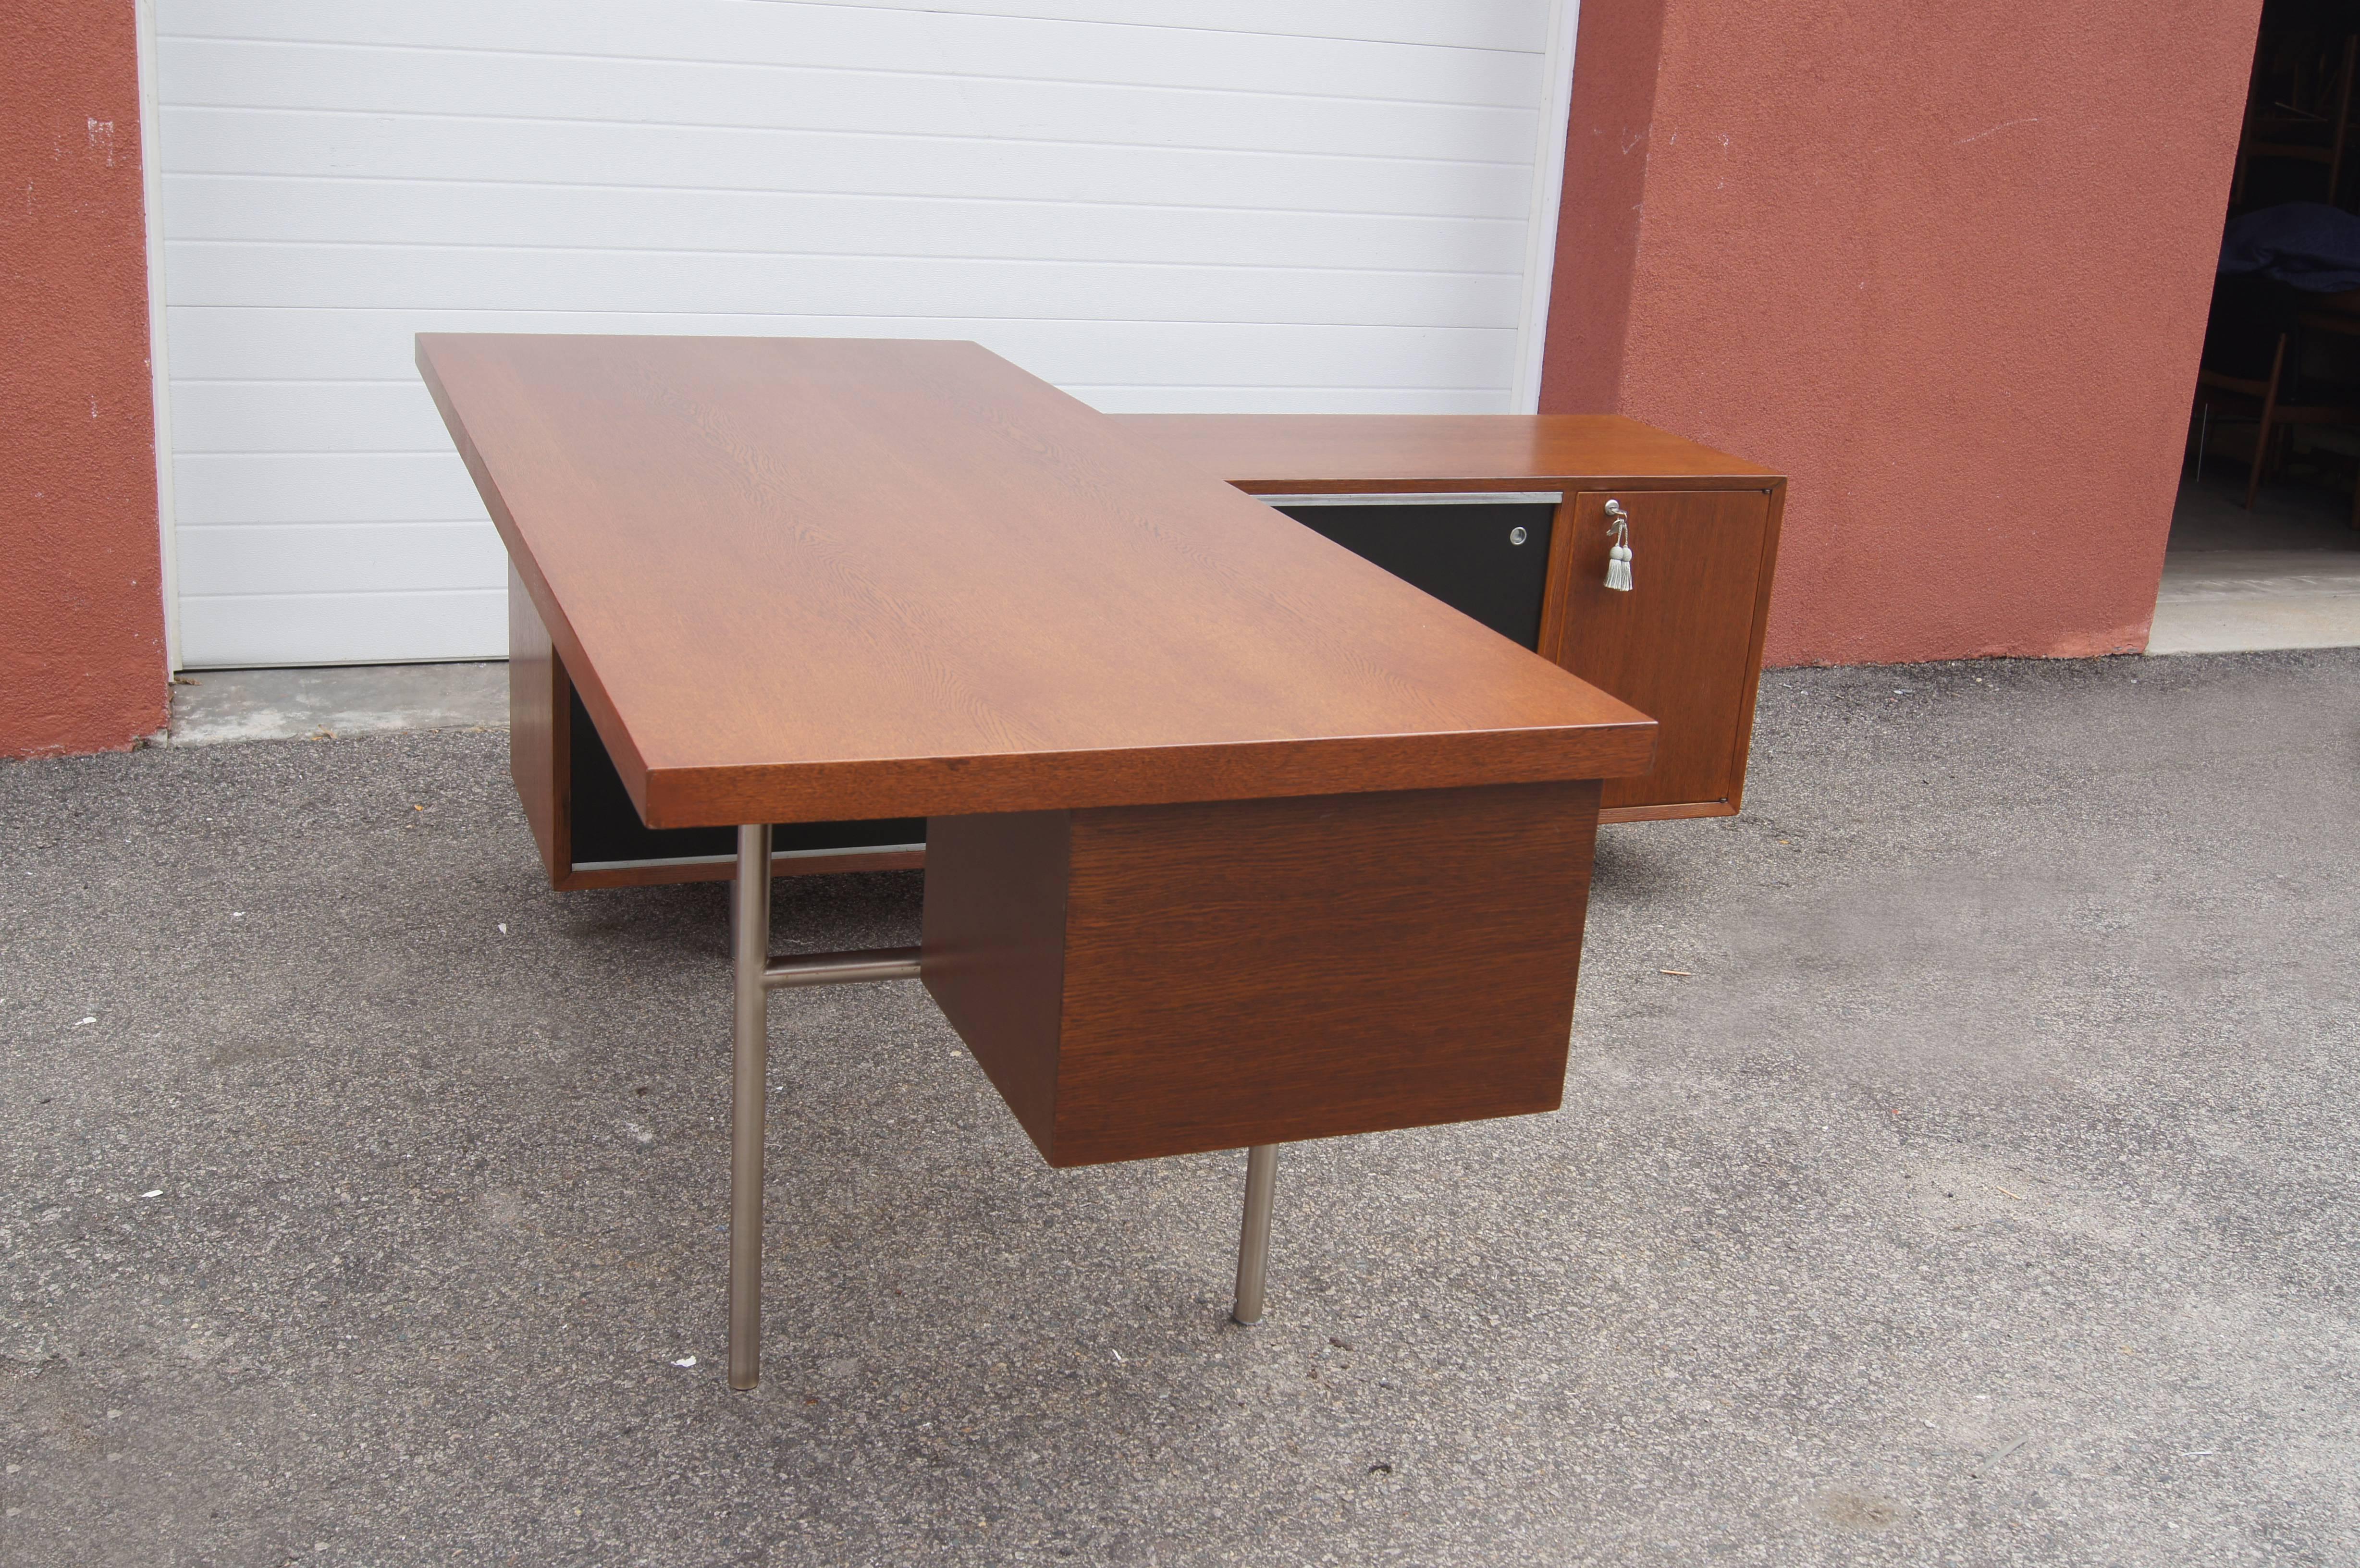 Metal Walnut EOG Desk with Storage Unit by George Nelson for Herman Miller